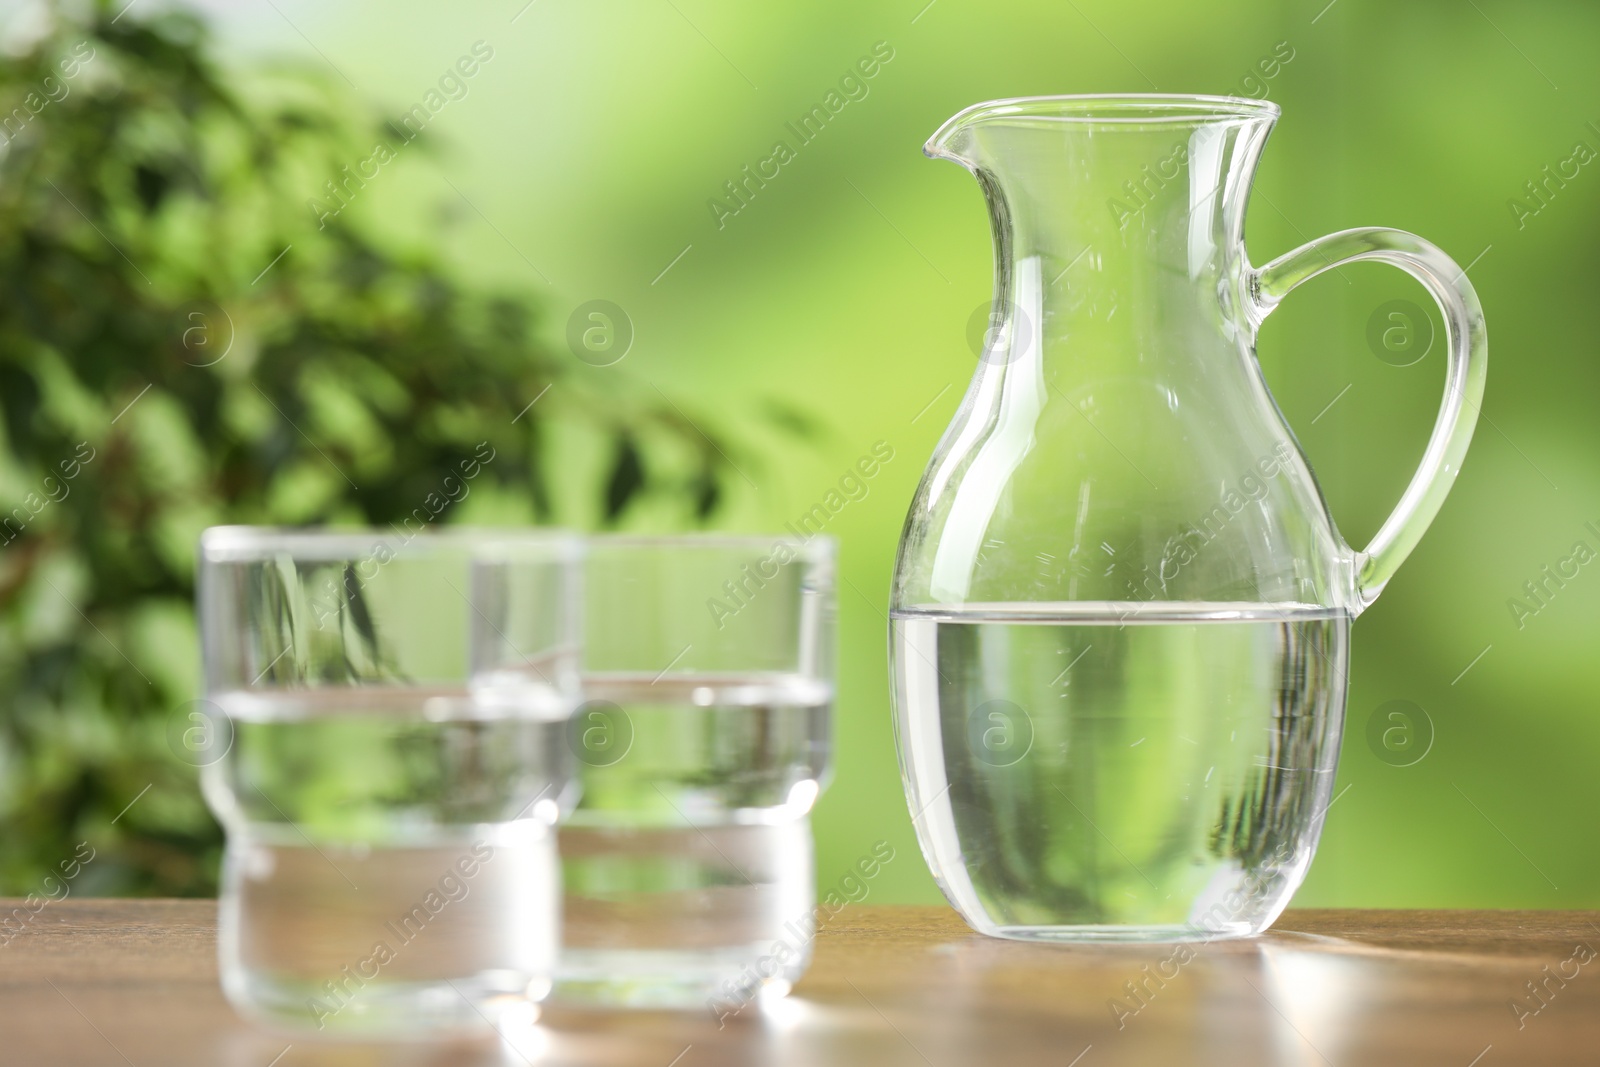 Photo of Jug and glasses with clear water on wooden table against blurred green background, closeup